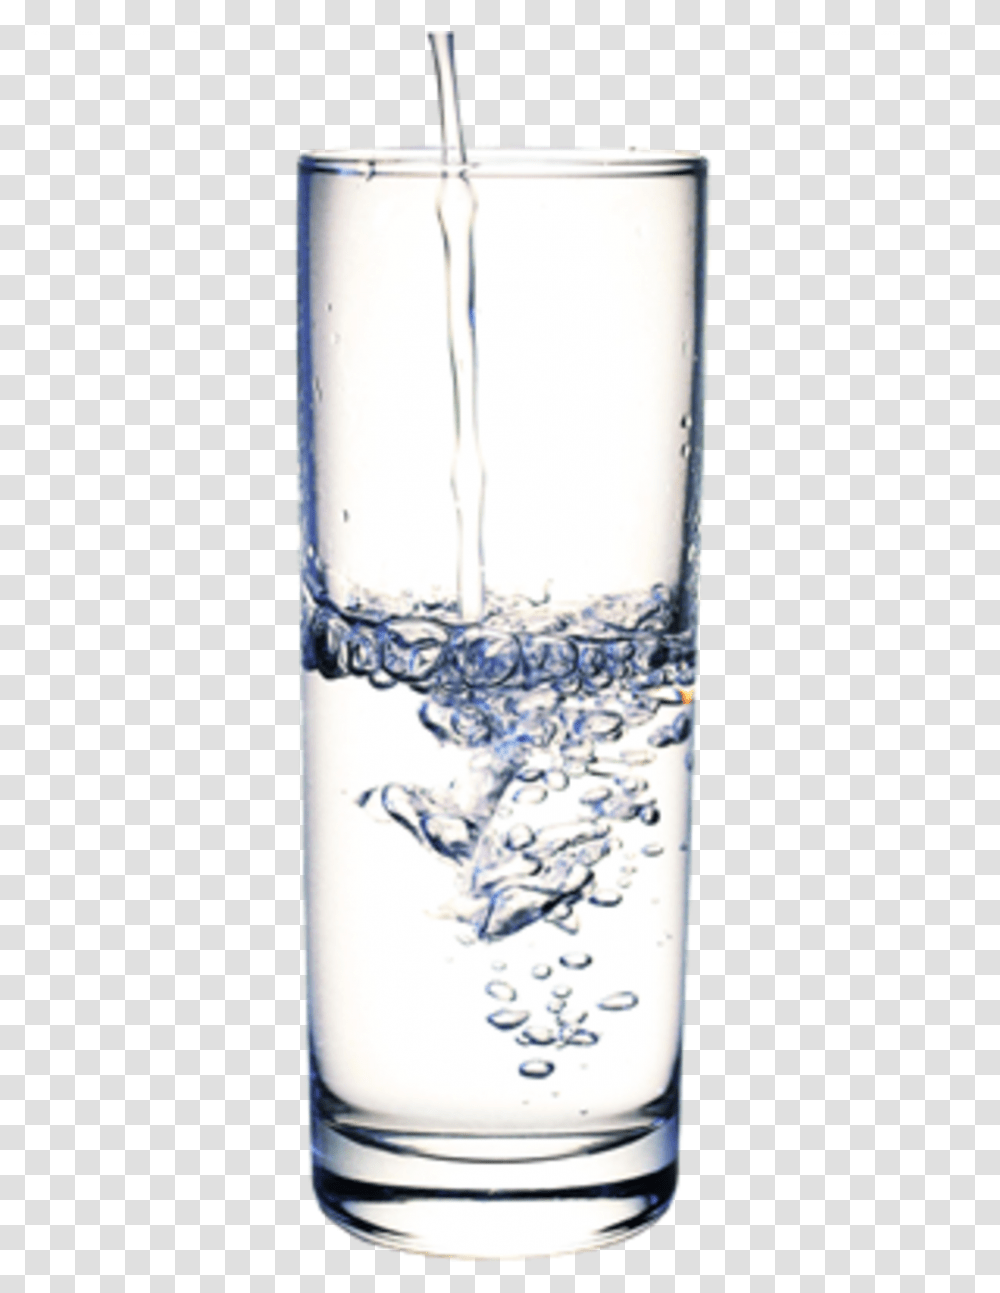 Drinking Water Glass Drinking Water Wastewater 2 Litre Of Water, Beverage, Bottle, Wine Glass, Alcohol Transparent Png